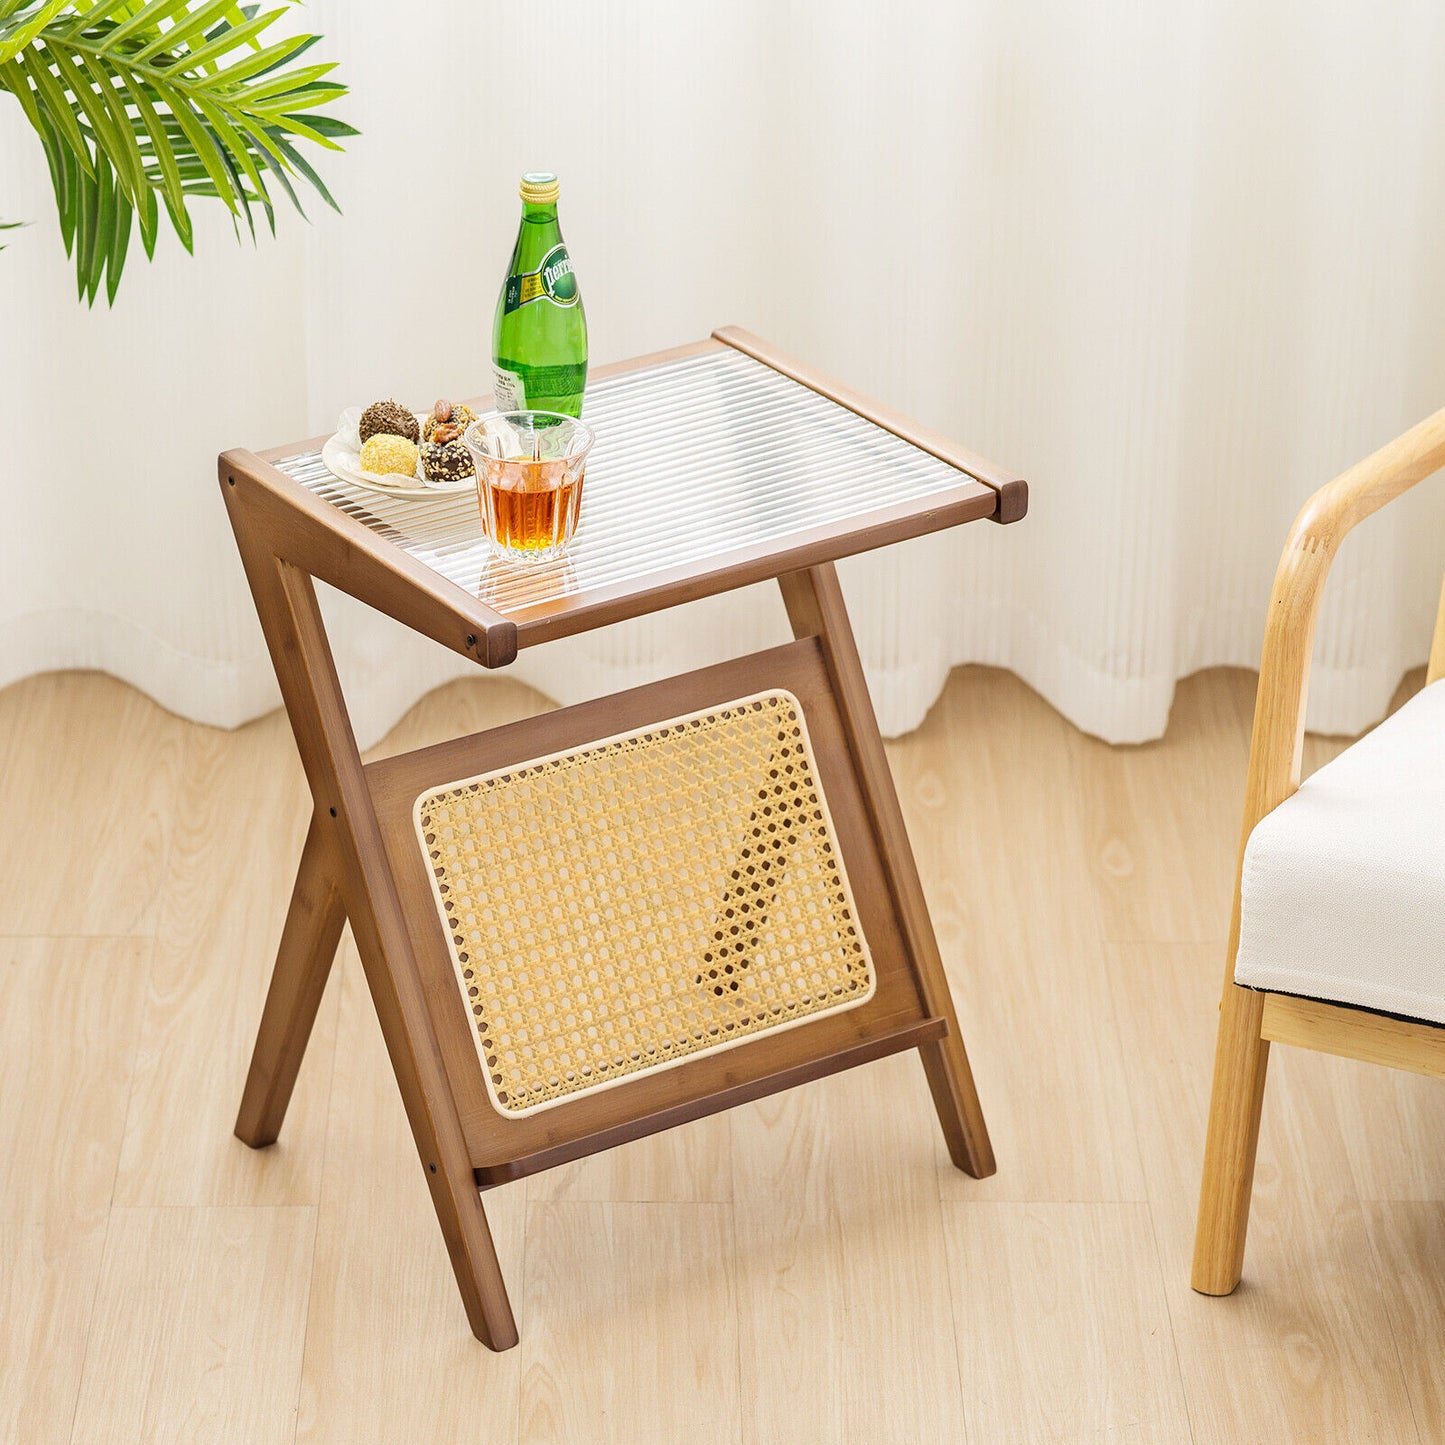 Nightstand - Side Table with Handwoven Rattan Magazine Holder